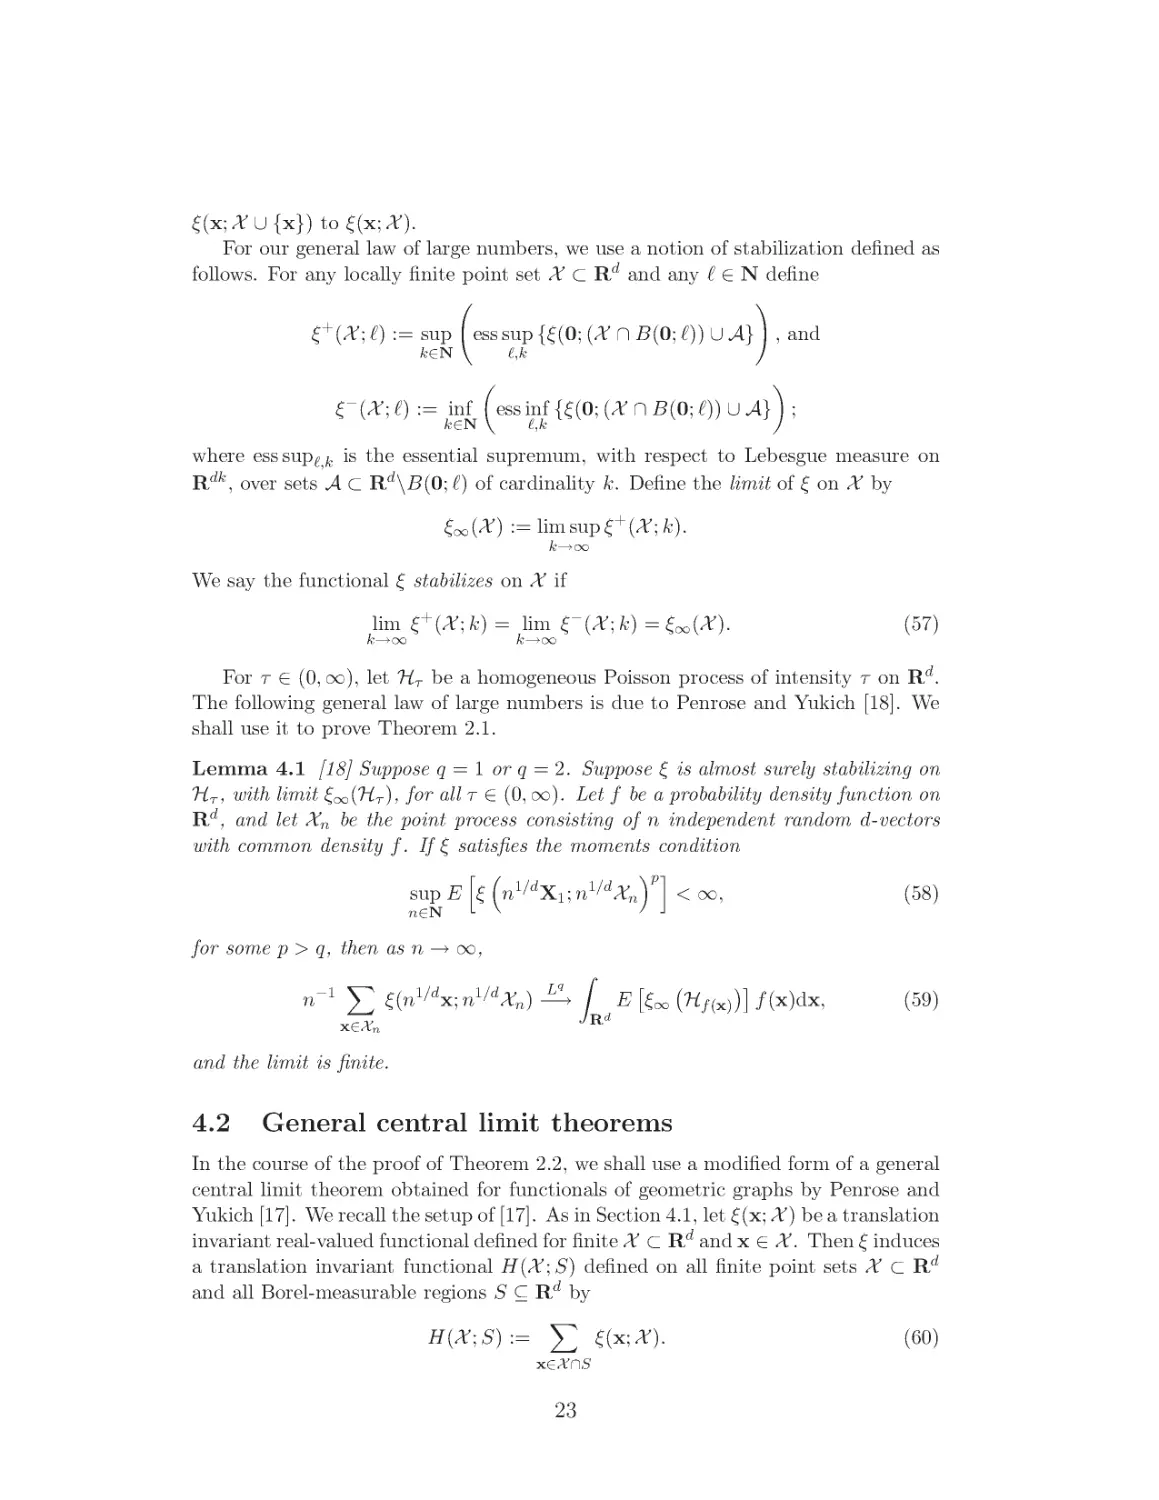 General central limit theorems